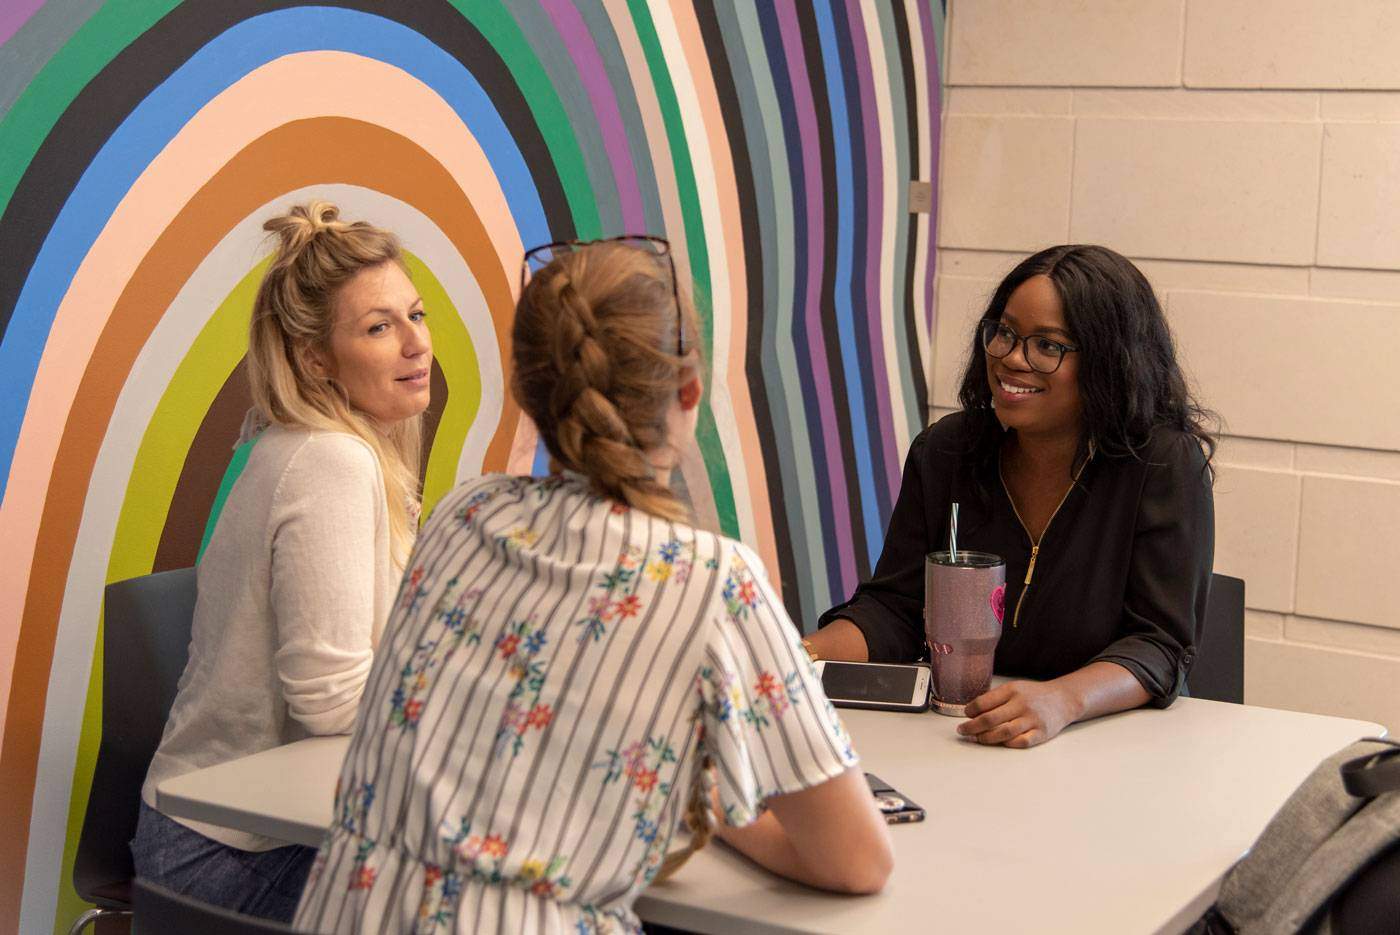 three women students chat at a small table next to a colorfully painted wall